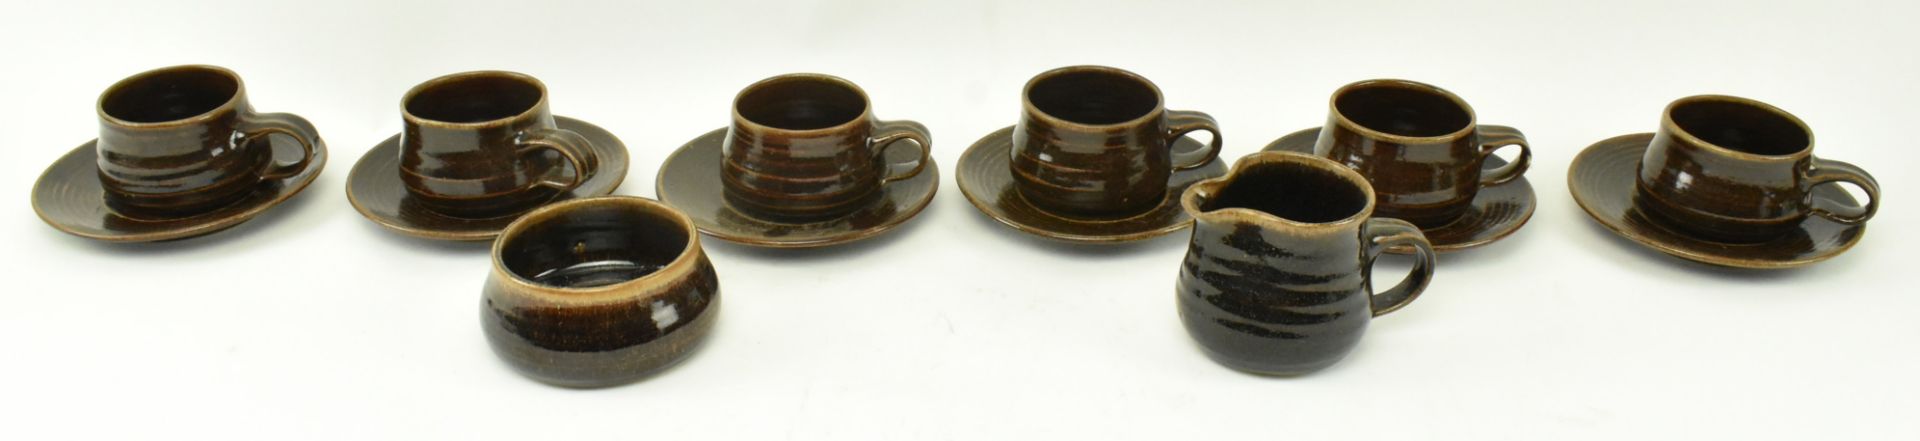 SCOTT MARSHALL - BOSCEAN POTTERY - SET OF SIX CUPS & SAUCERS - Image 2 of 8